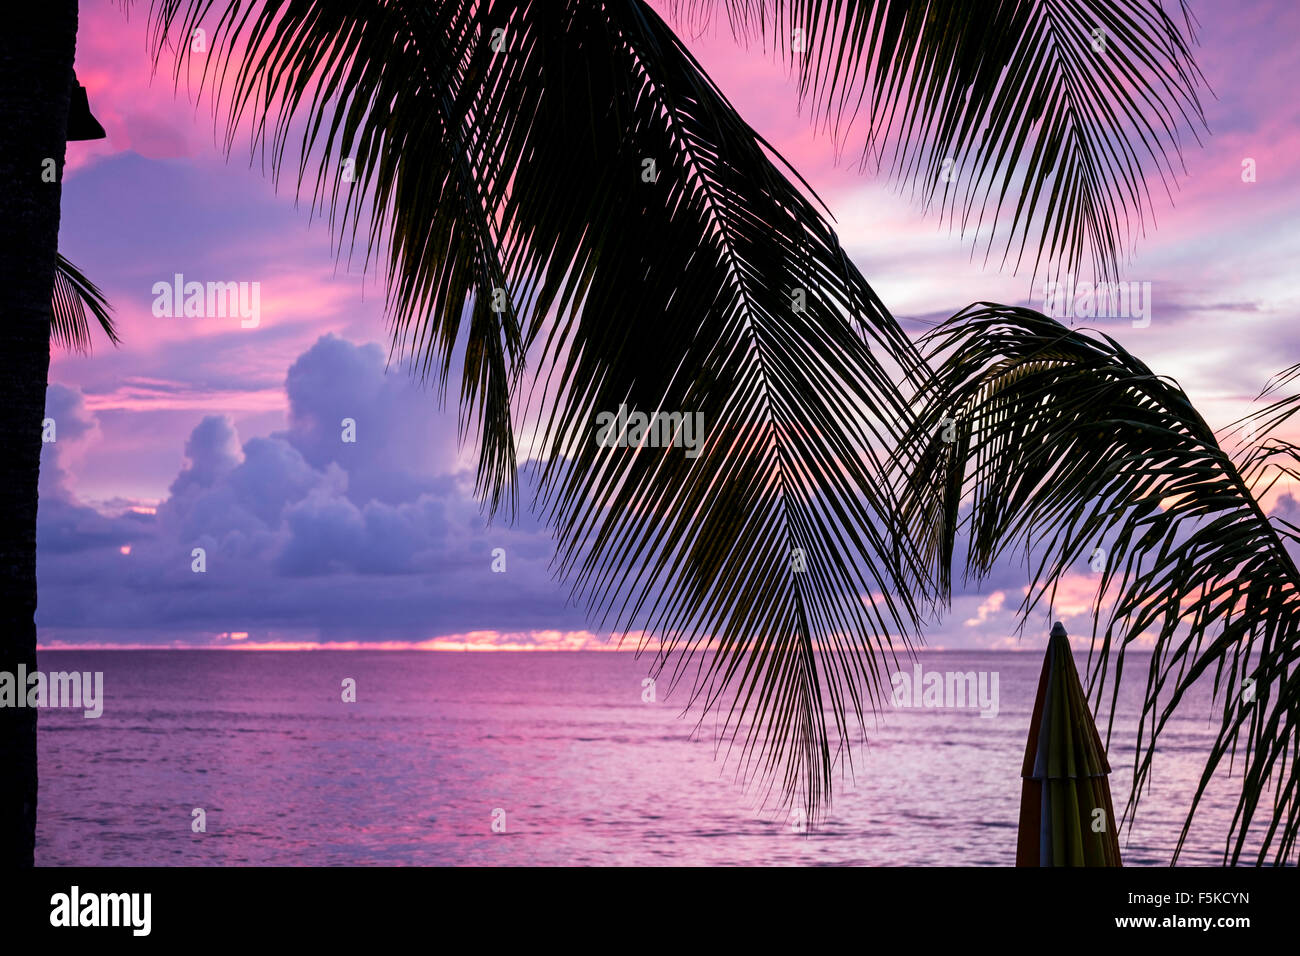 A gloriously beautiful sunset on St. Croix, U.S. Virgin Islands, west end. Stock Photo